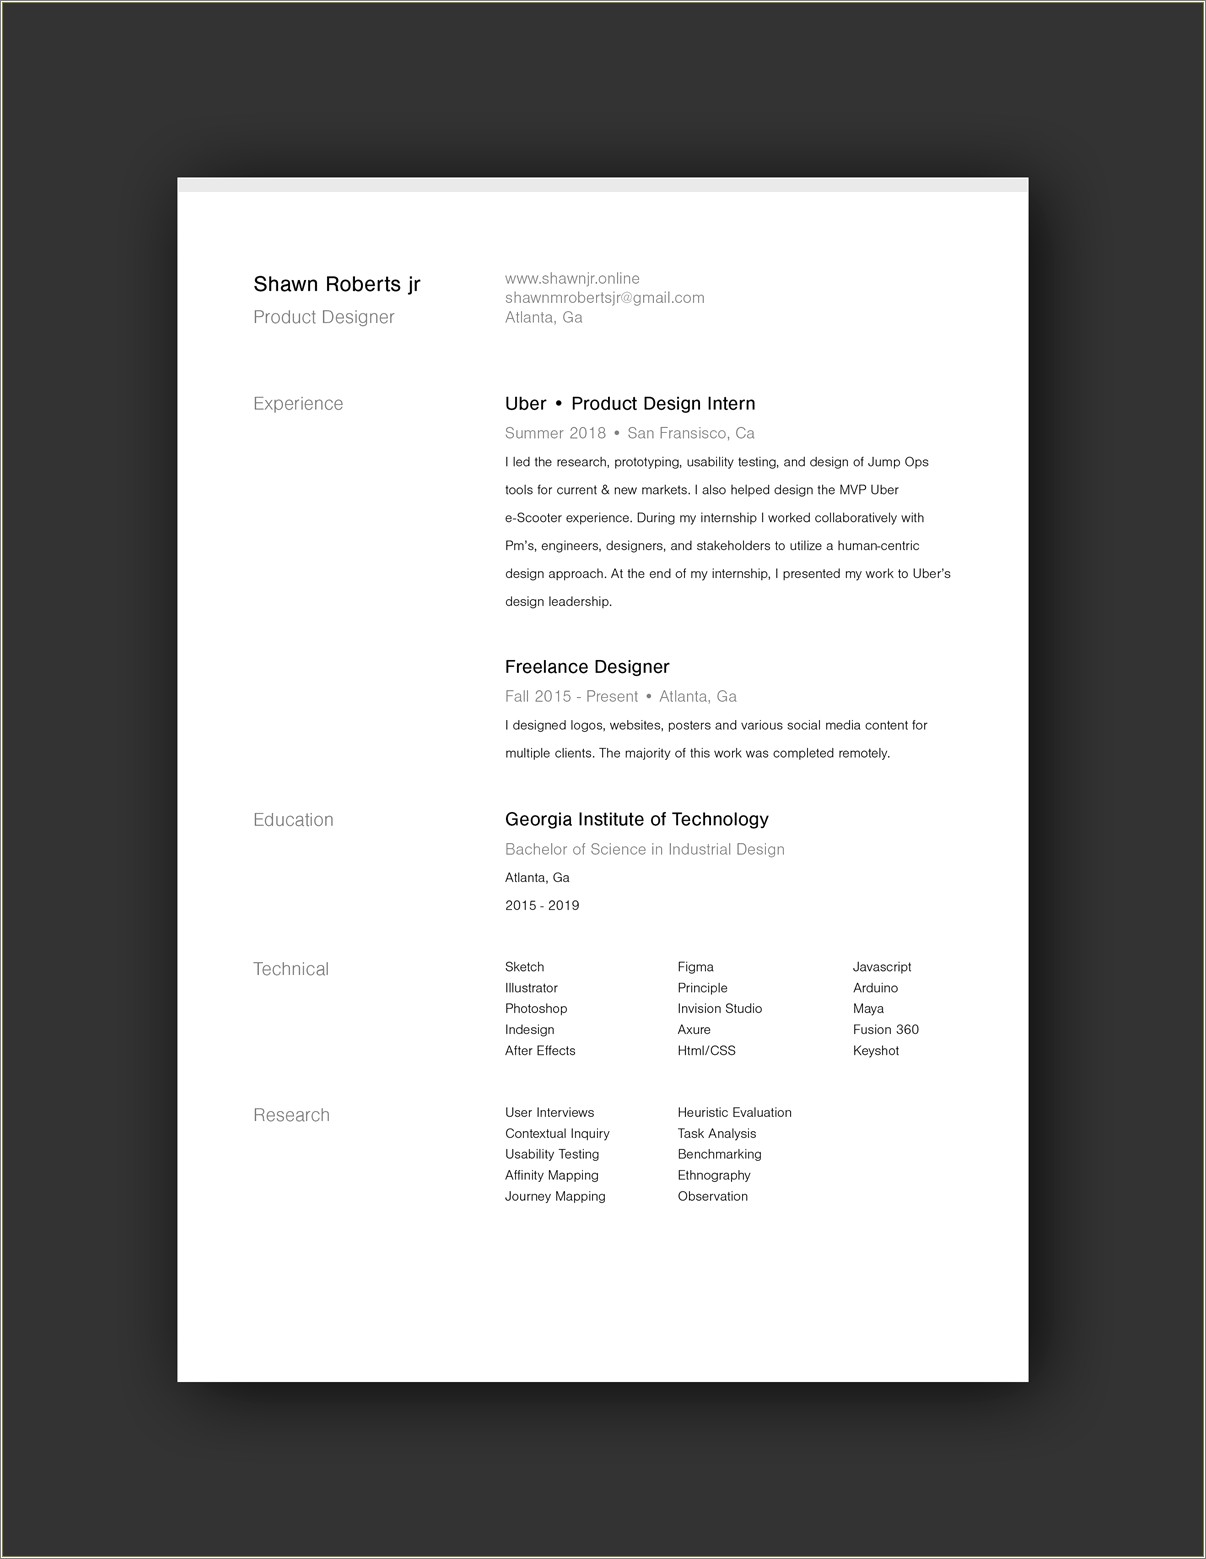 Resume Format For Tech Industry Jobs